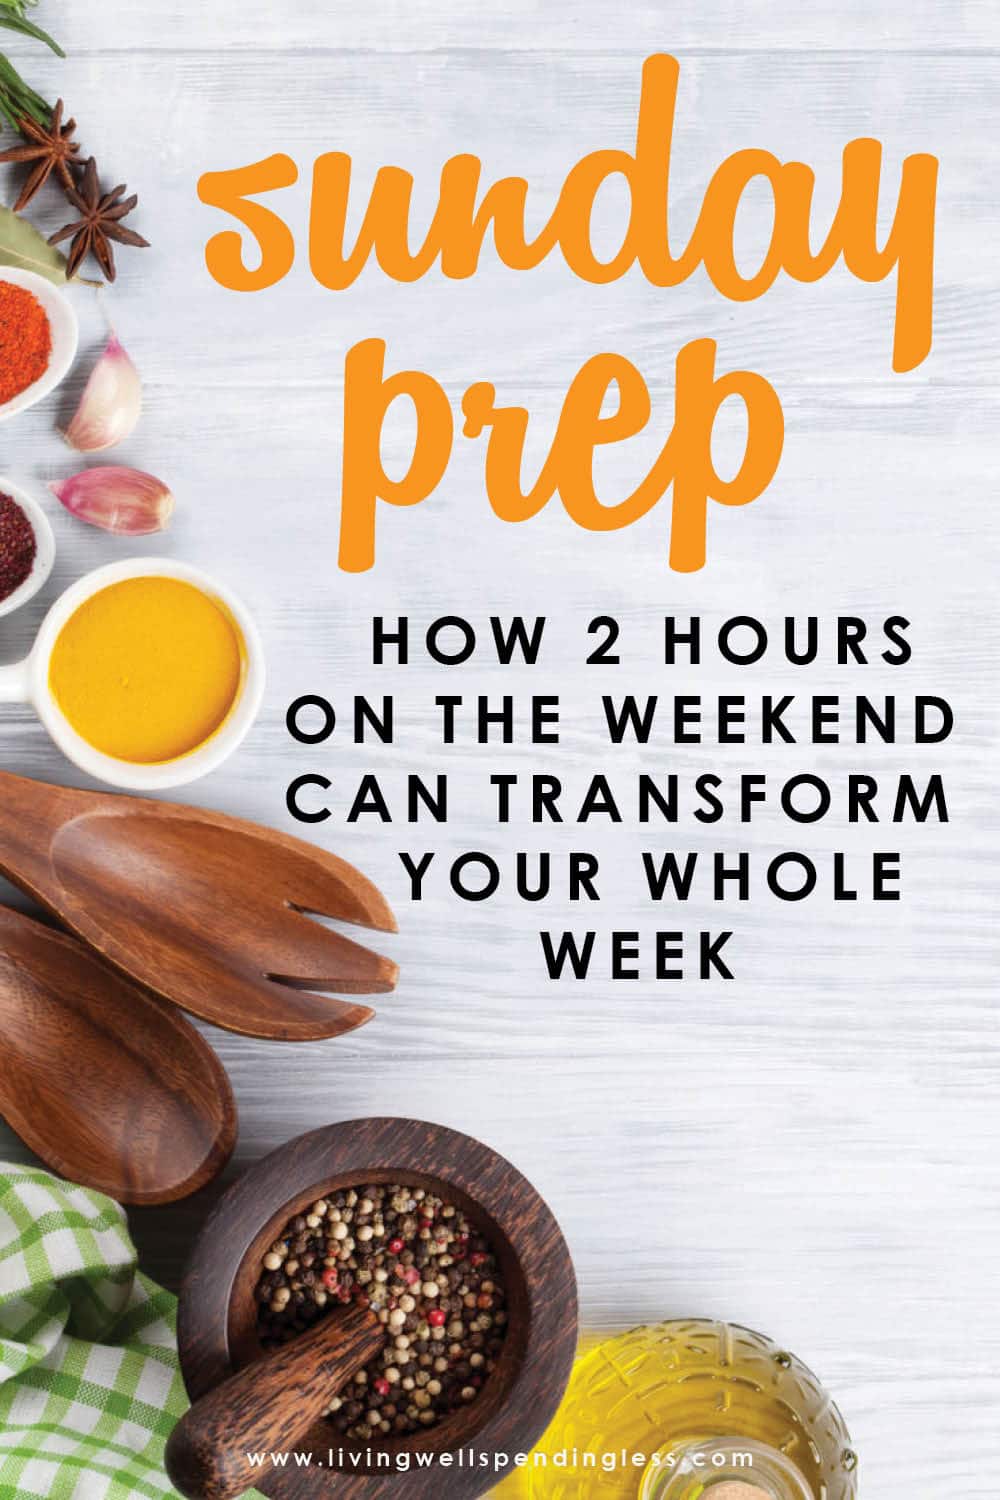 https://www.livingwellspendingless.com/wp-content/uploads/2014/08/Sunday-Prep-How-2-Hours-on-the-Weekend-can-Transform-your-Whole-Week_Vertical.jpg